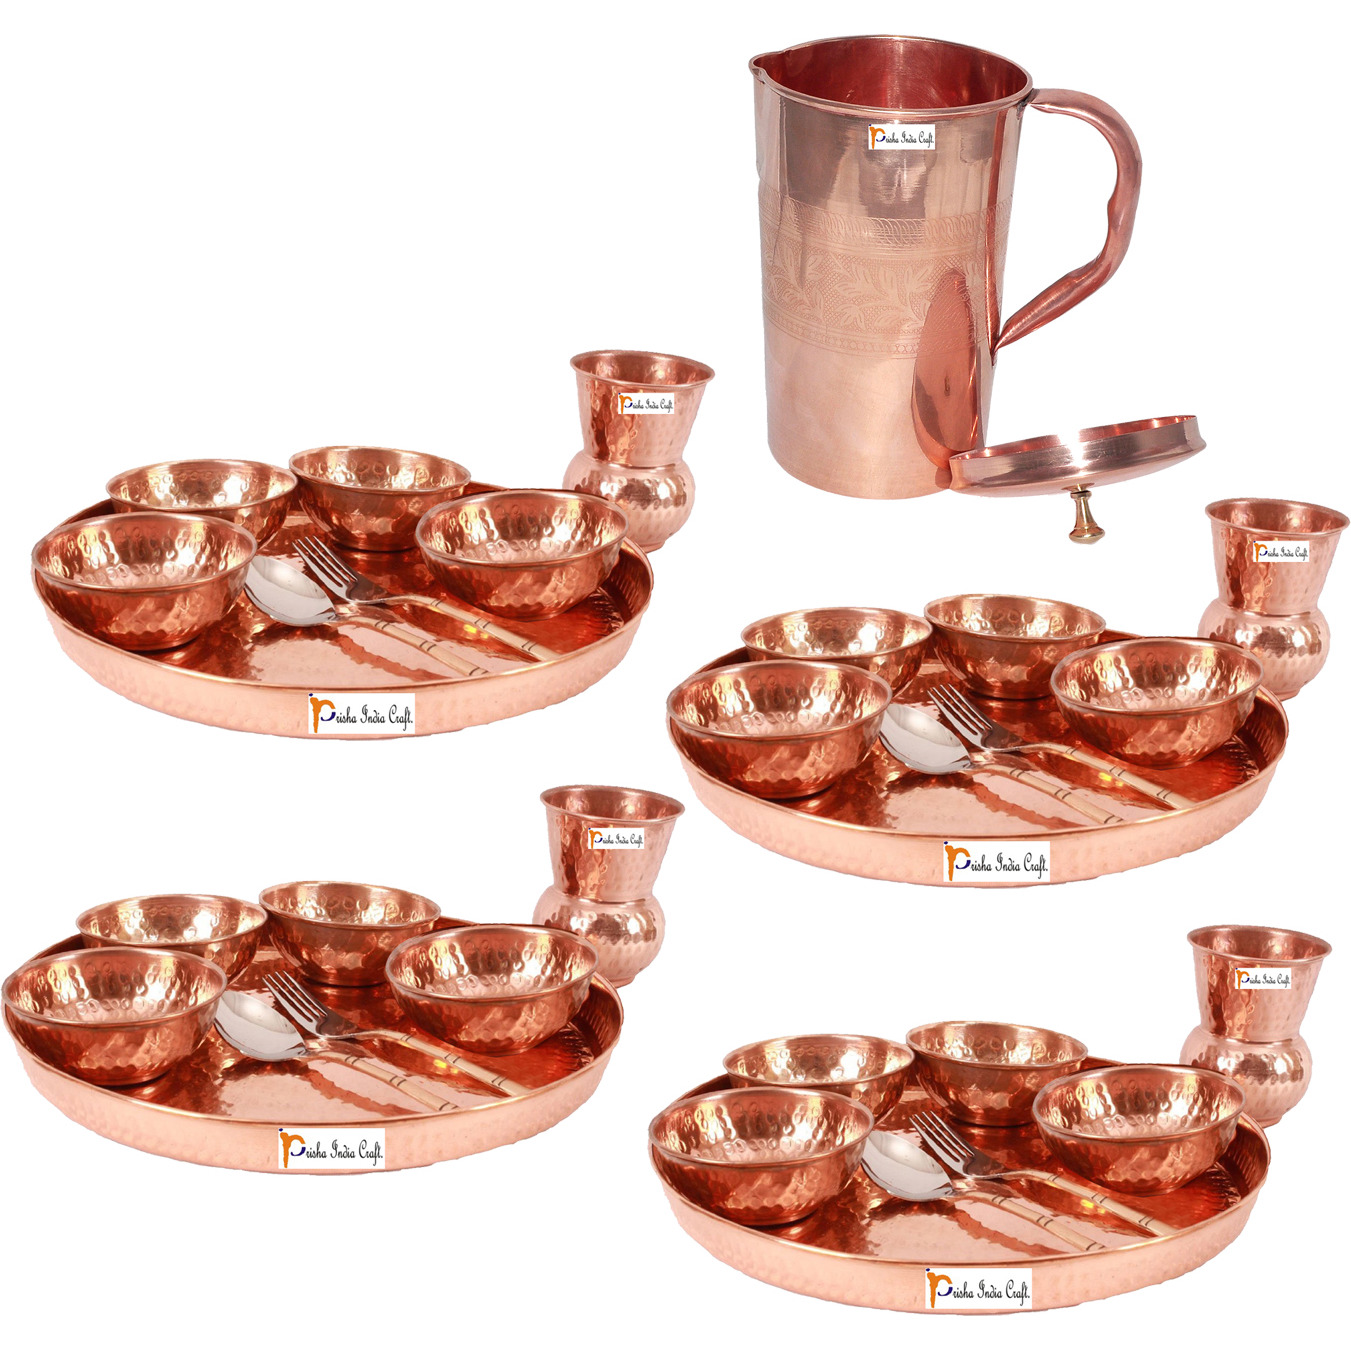 Prisha India Craft B. Set of 4 Dinnerware Traditional 100% Pure Copper Dinner Set of Thali Plate, Bowls, Glass and Spoon, Dia 12  With 1 Pure Copper Embossed Pitcher Jug - Christmas Gift